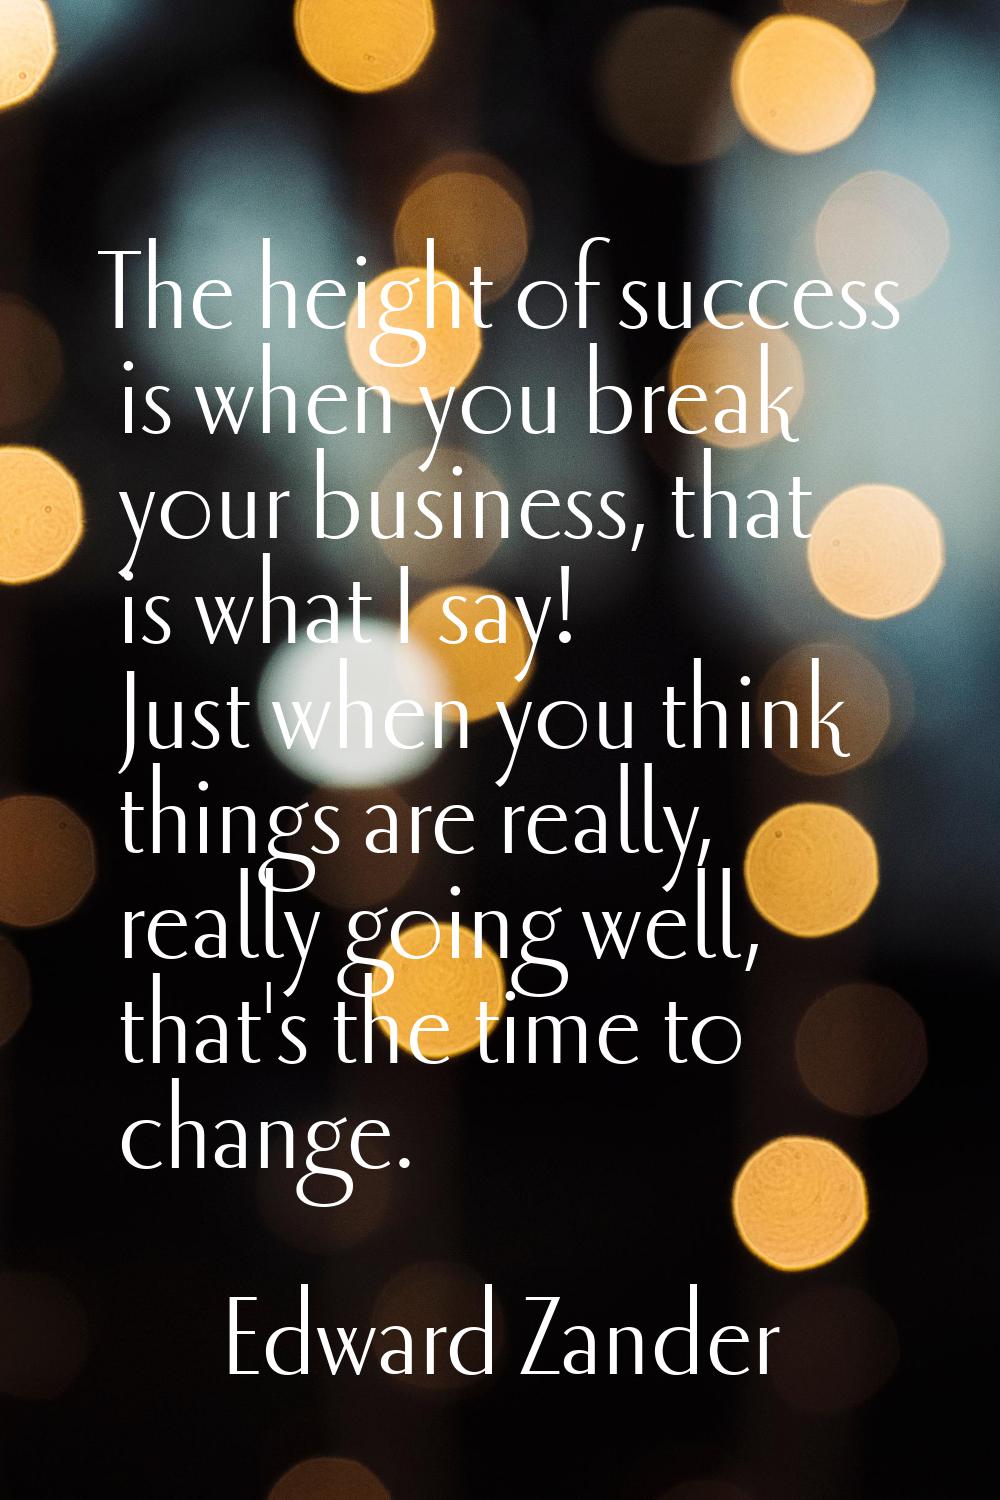 The height of success is when you break your business, that is what I say! Just when you think thin